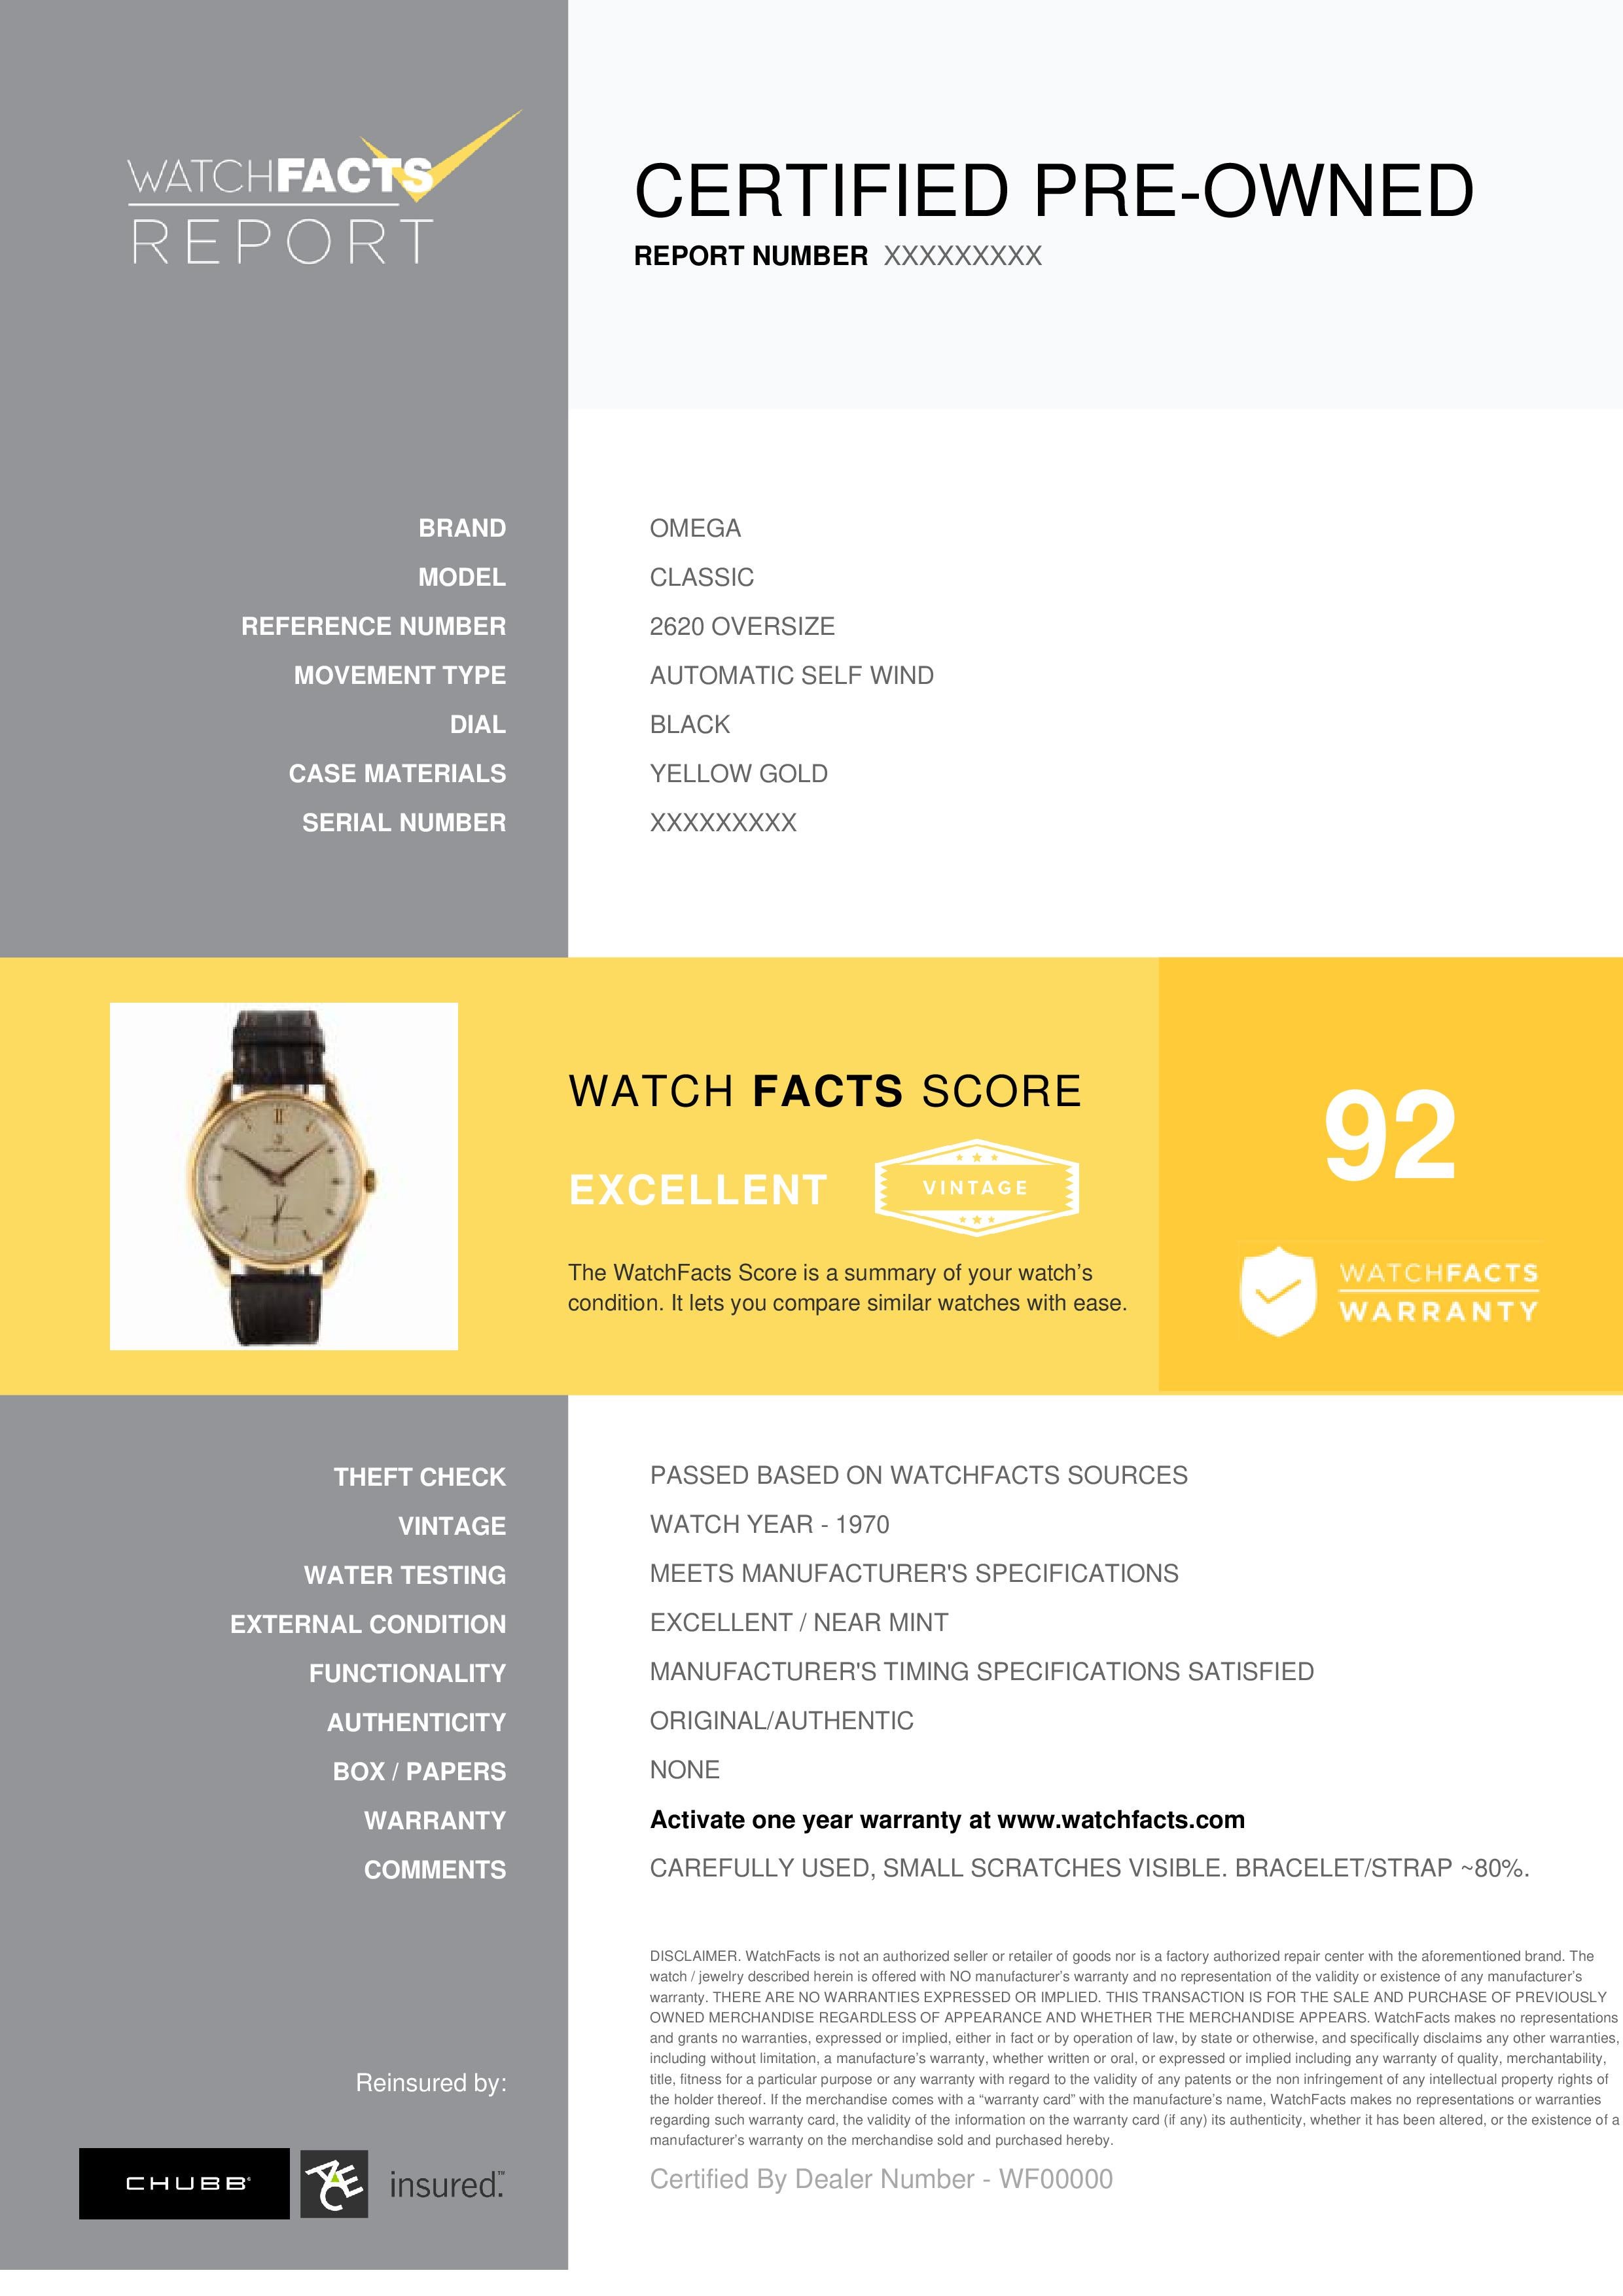 Omega Classic Reference #: 2620 OVERSIZE. Mens Automatic Self Wind Watch Yellow Gold Black 0 MM. Verified and Certified by WatchFacts. 1 year warranty offered by WatchFacts.
